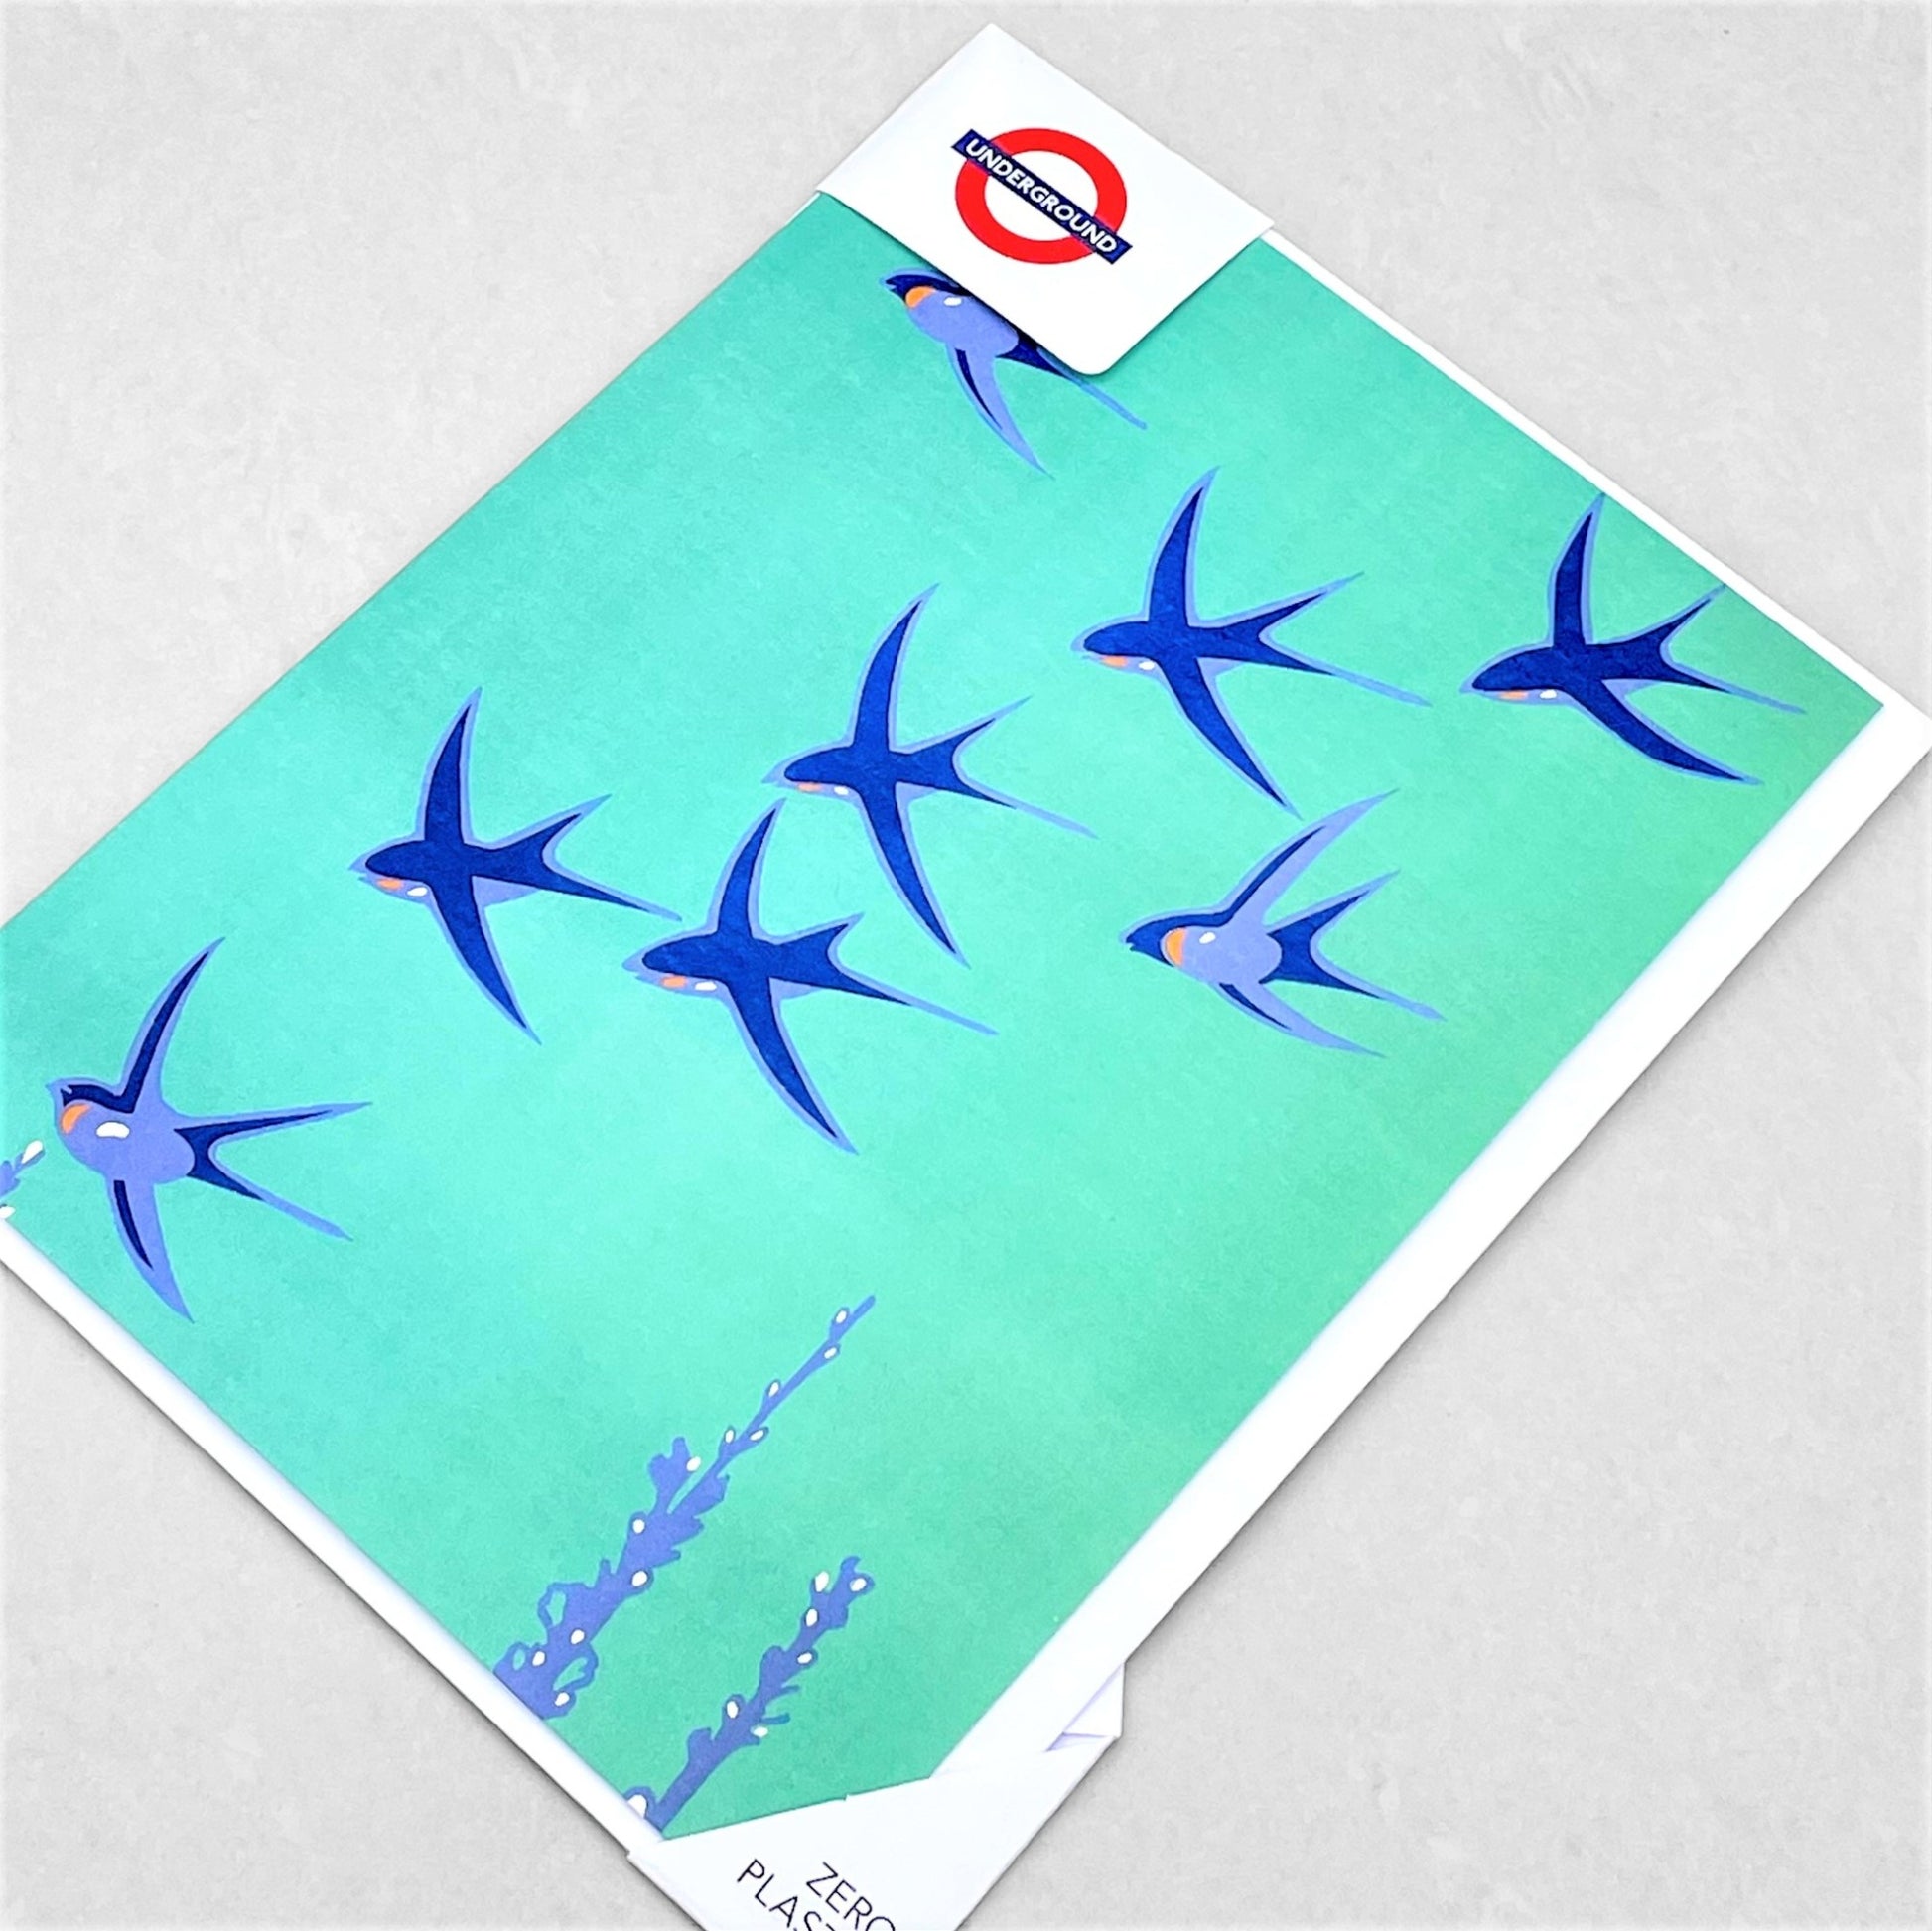 greetings card showing abstract blue birds flying with an aqua backdrop